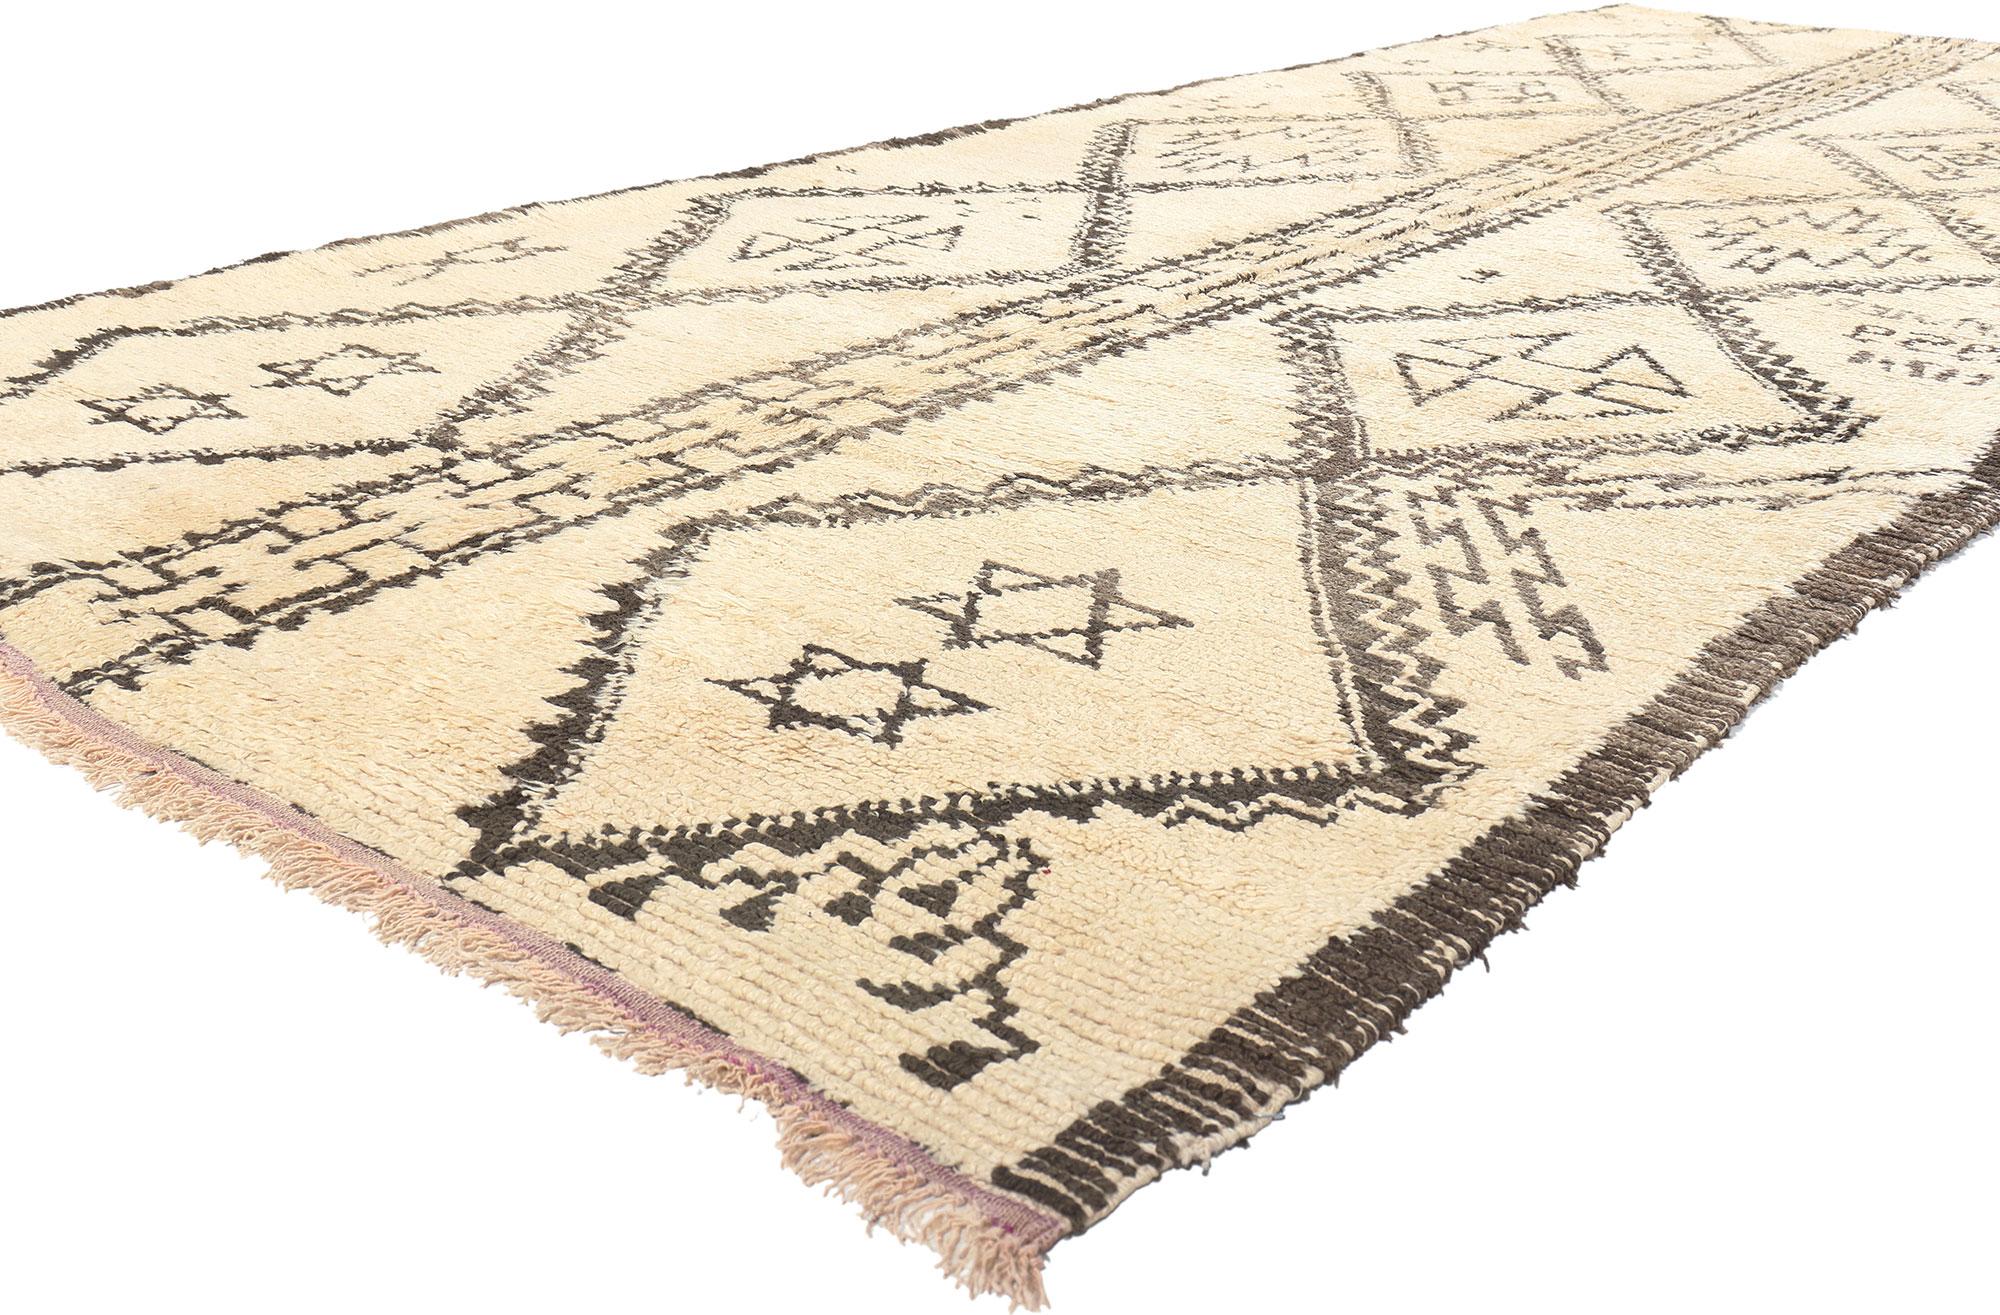 20046 Vintage Moroccan Beni Ourain Rug, 05'07 x 14'05.

Craft a serene and contemporary ambiance with this hand knotted wool vintage Moroccan Beni Ourain rug, where simplicity meets cozy sophistication. Neutral earthy tones blend seamlessly,